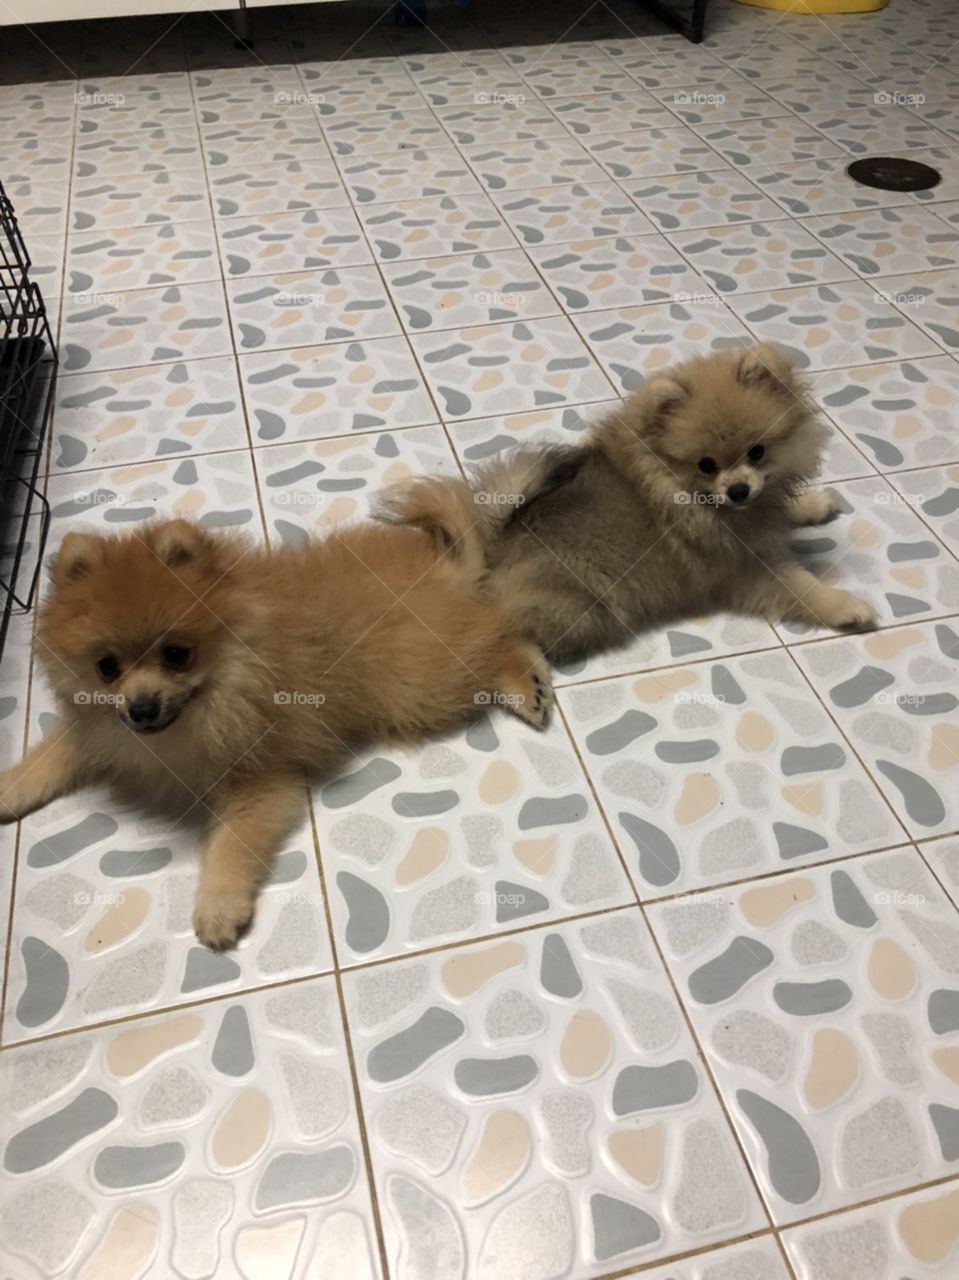 two naughty puppy "pomeranian" sitting back to back after tired from running.